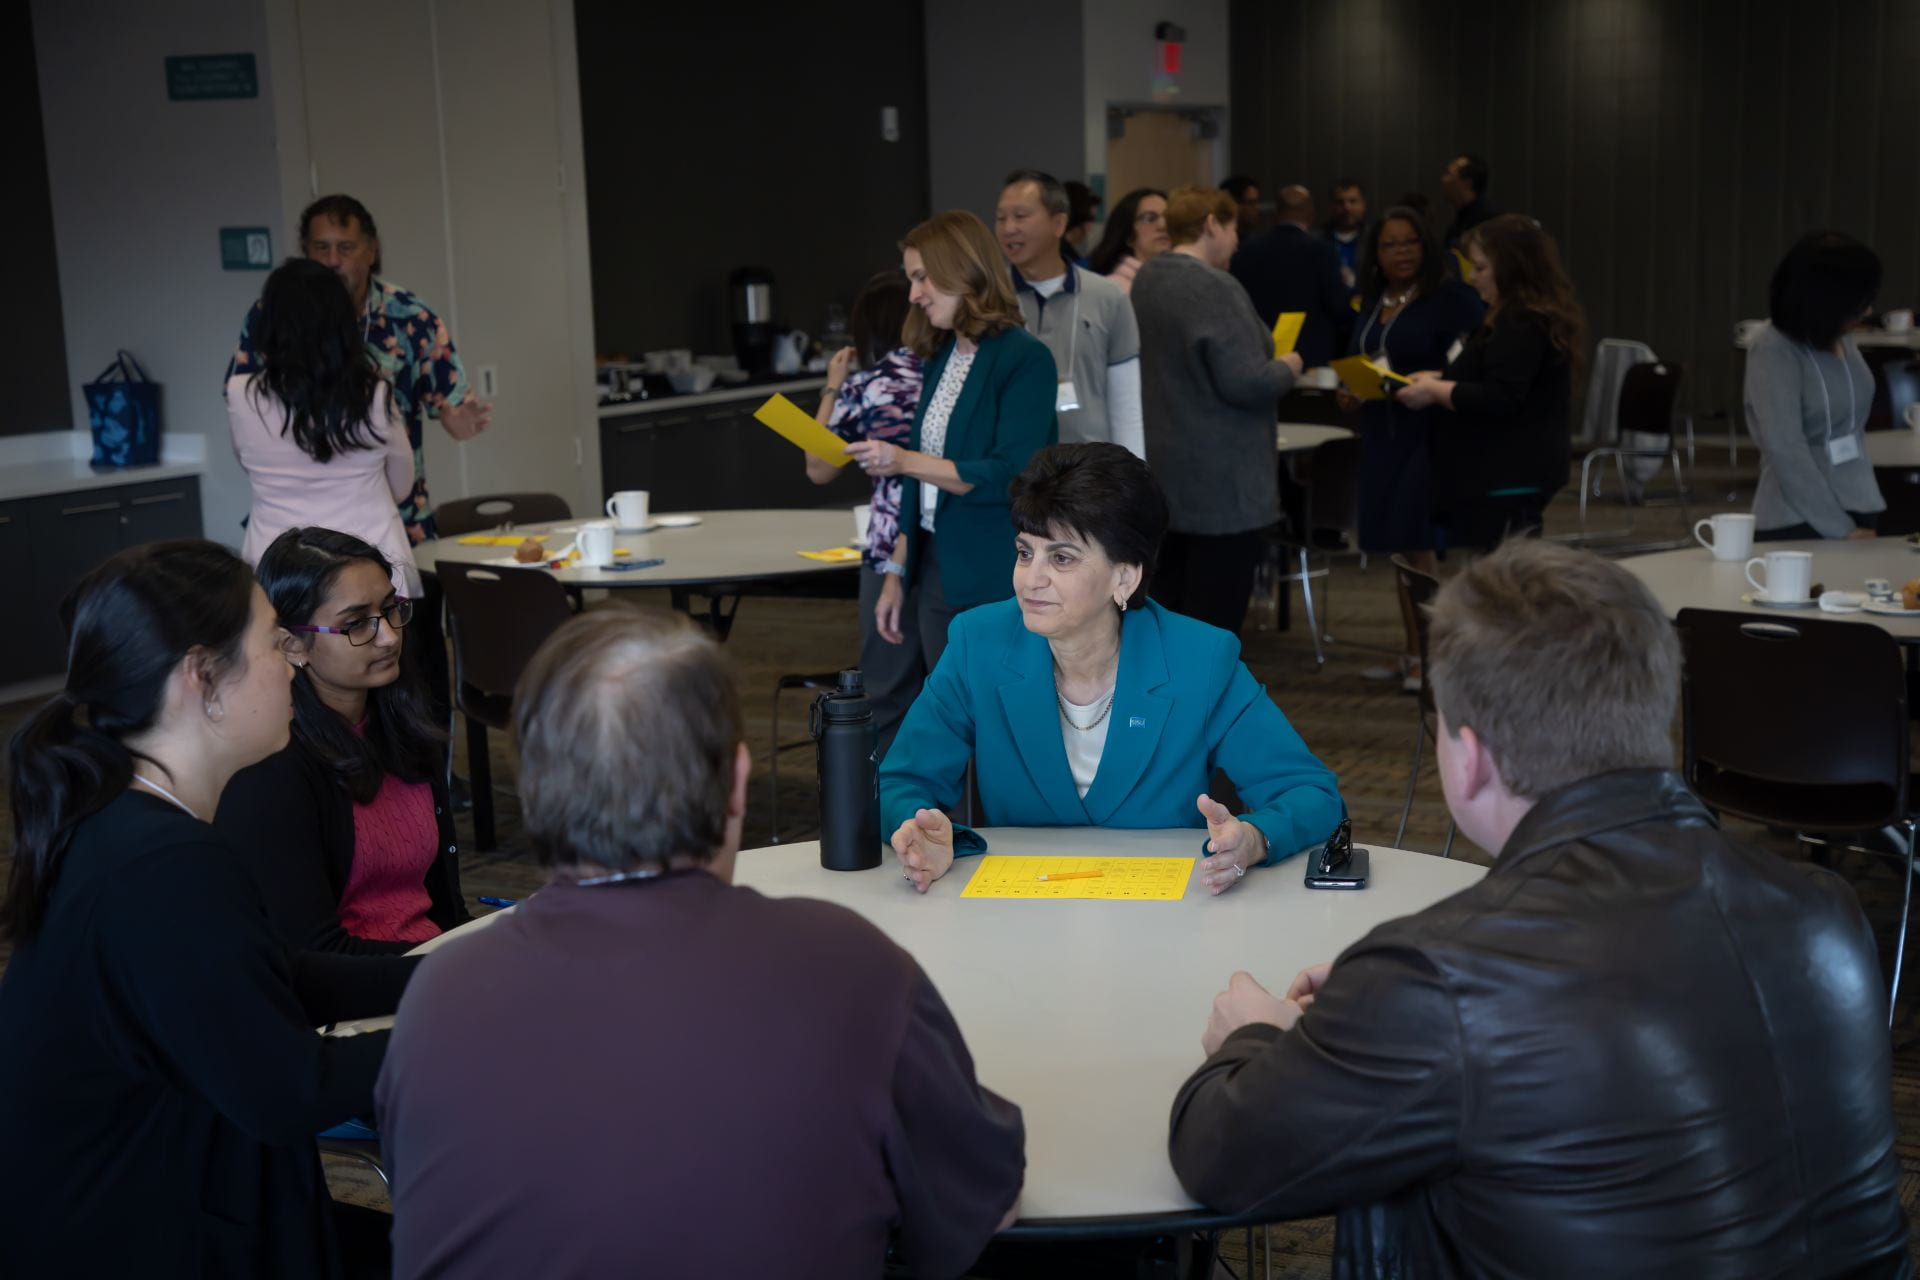 President Papazian talks with staff members at a "Coffee with the President" event.